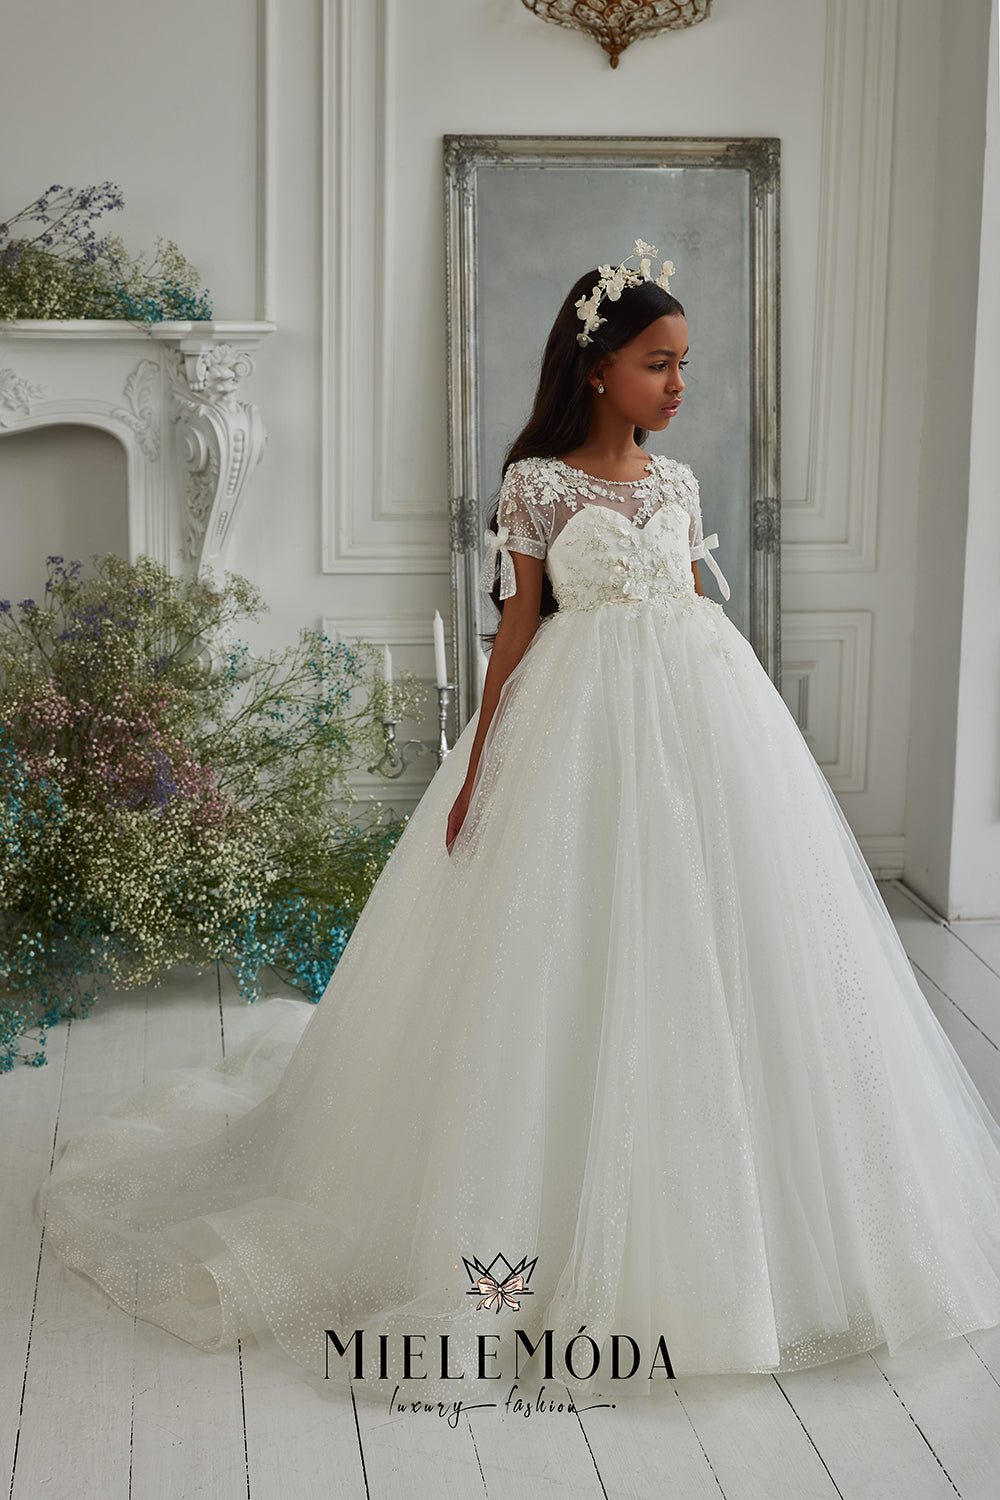 Sequin Trimmed Lace First Communion Dresses for Girls | First Communion  Dress with Sequin Trimmed Lace -Shop First Communion Dresses